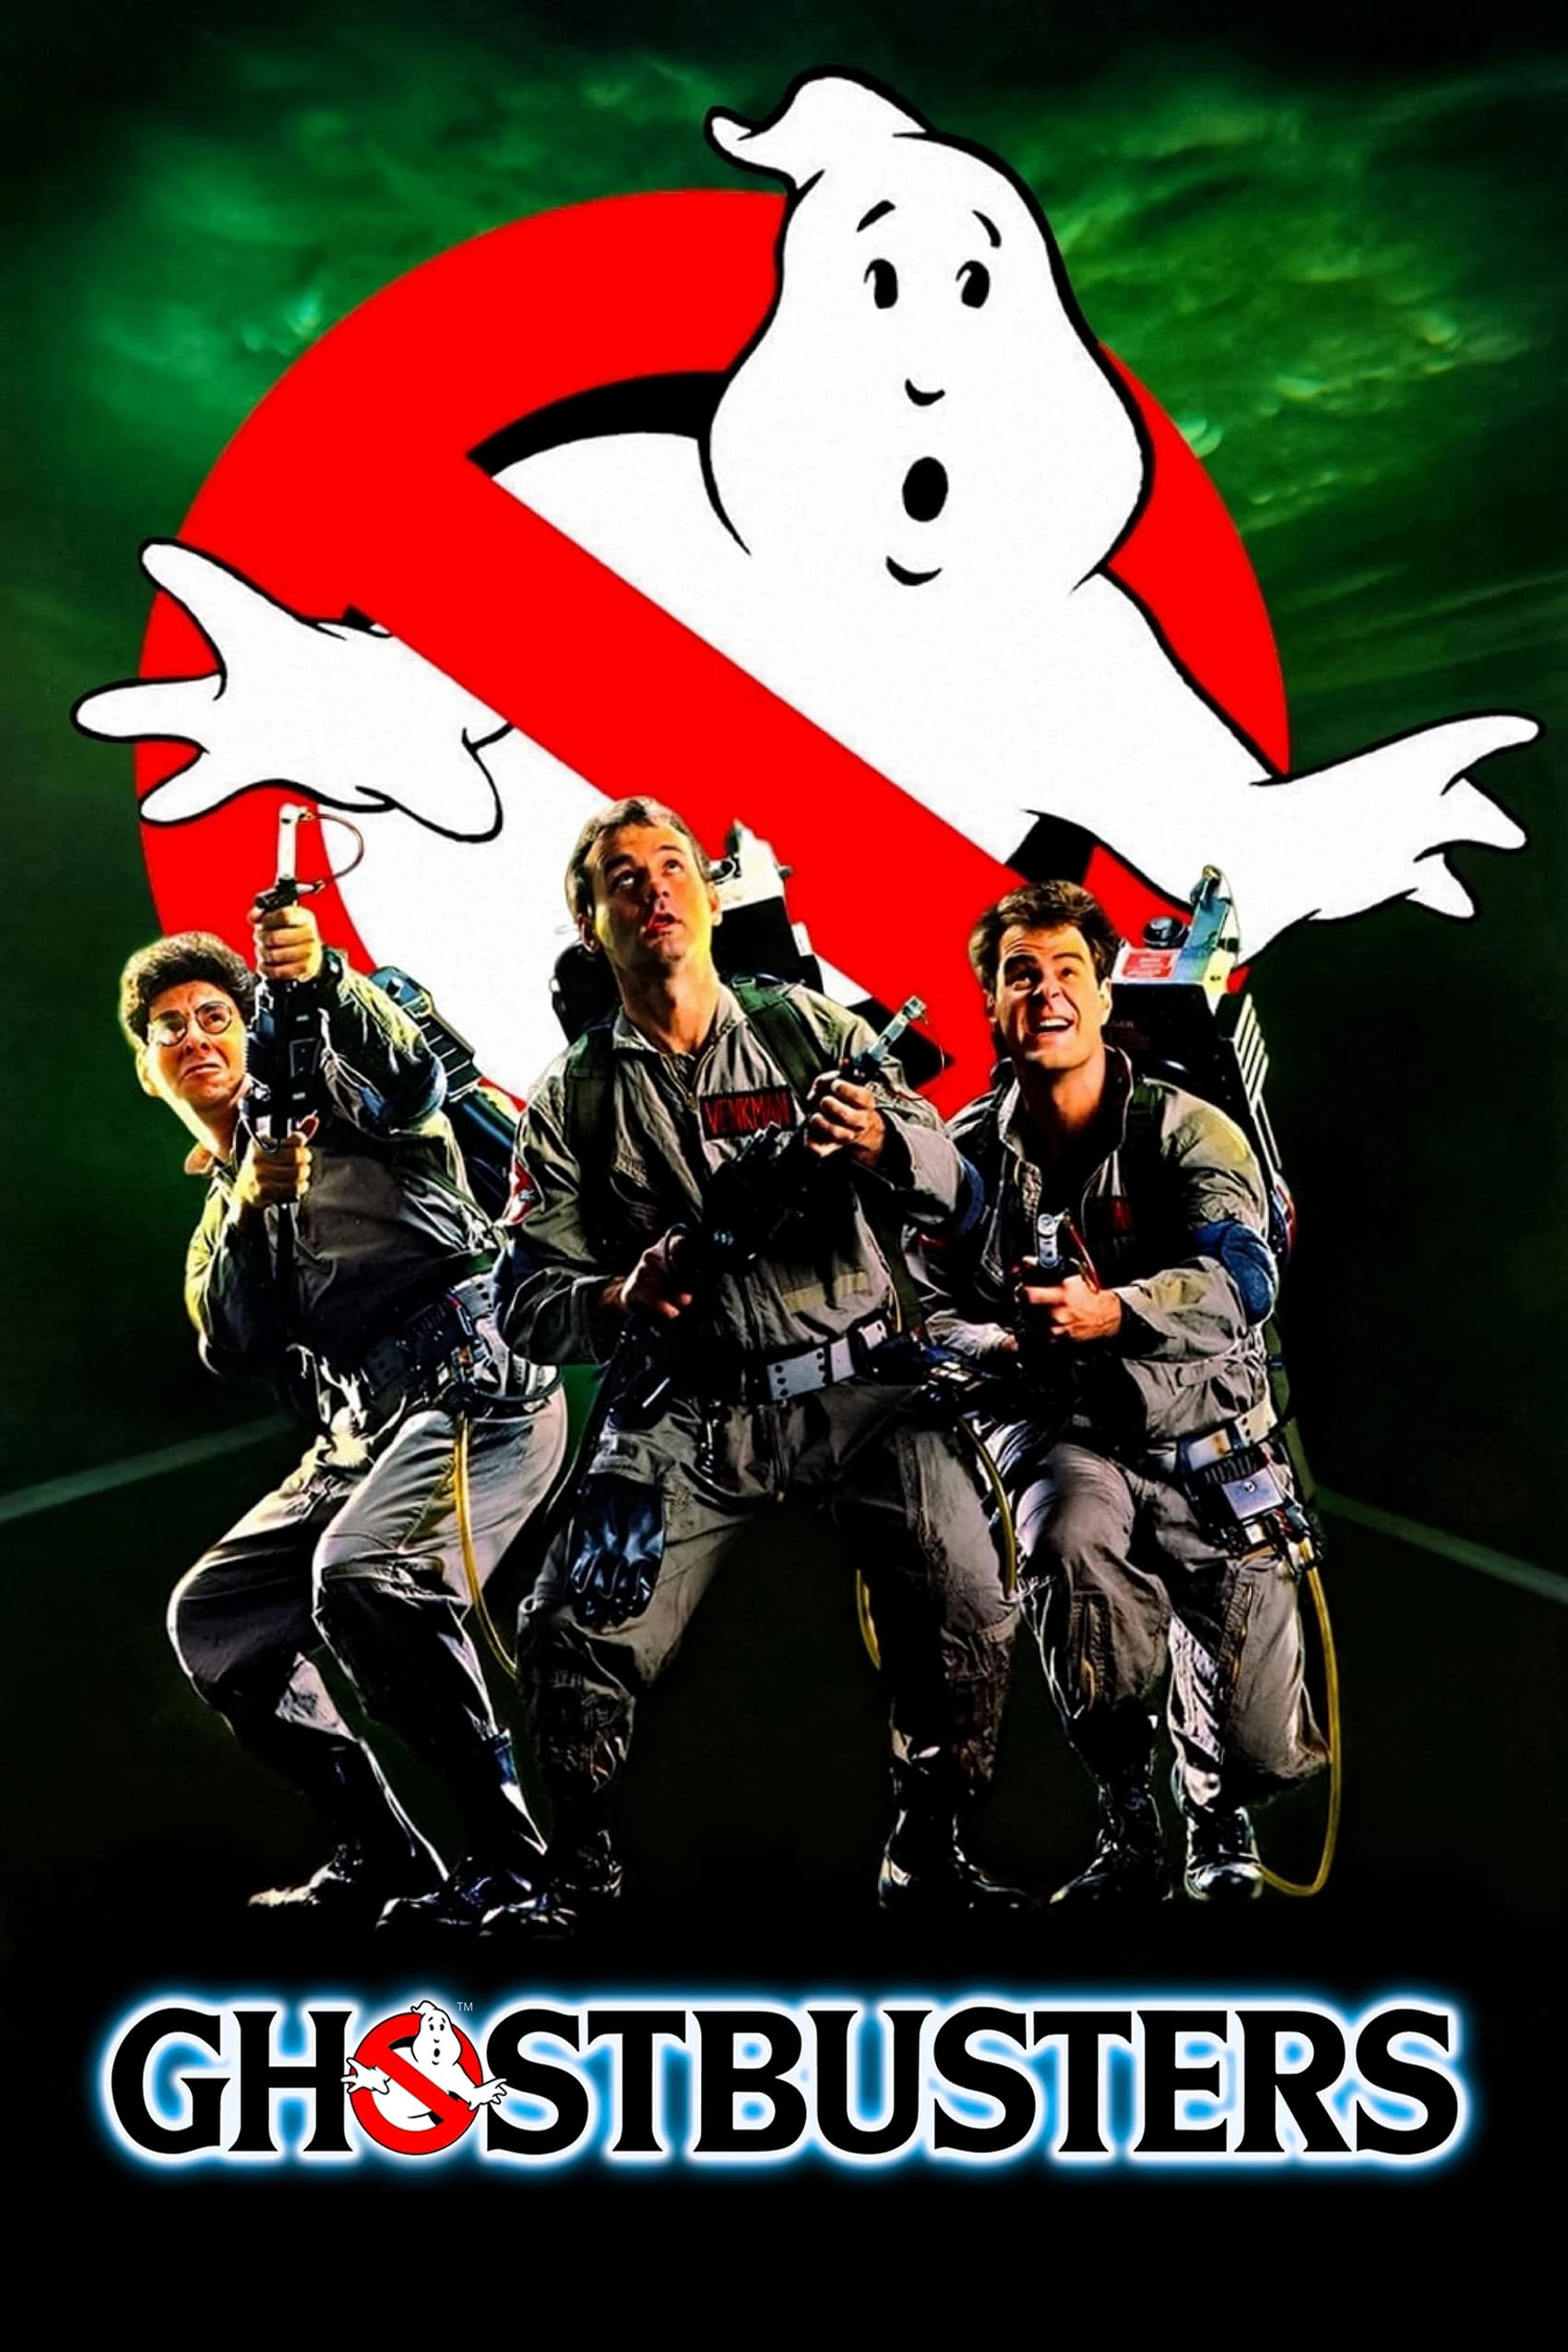 Ghostbusters | Ghostbusters (1984)